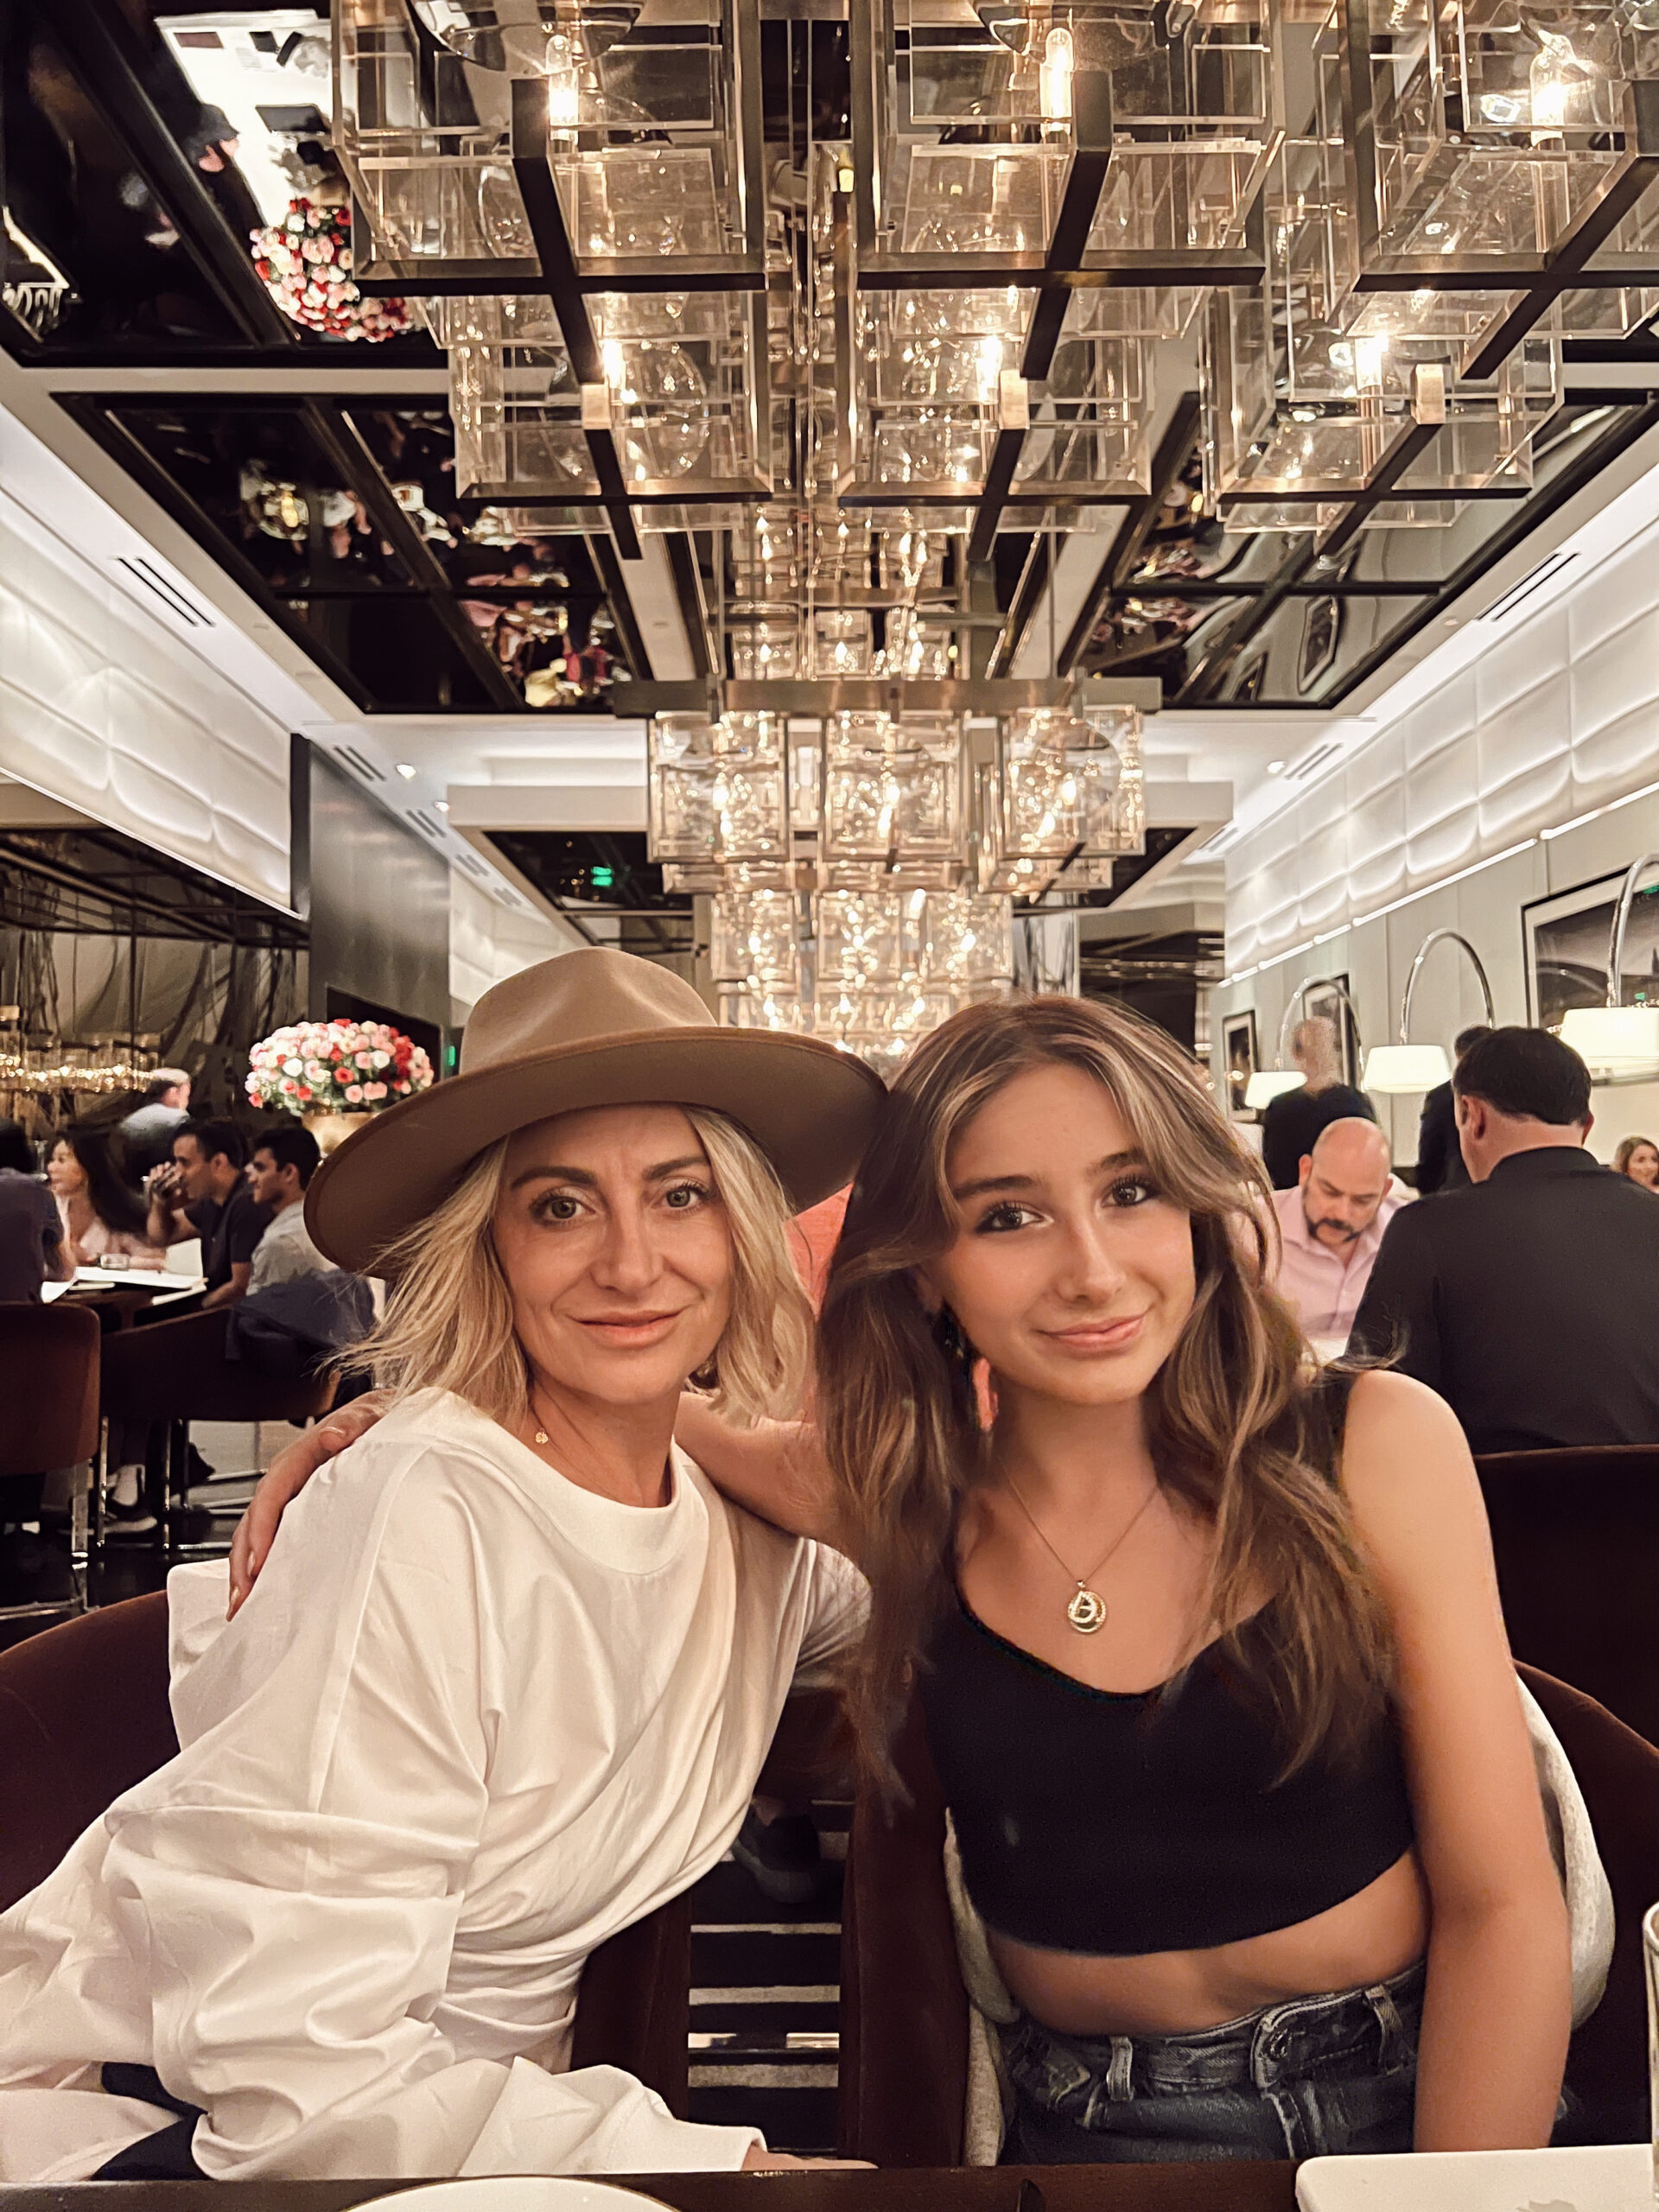 mom and daughter at restaurant